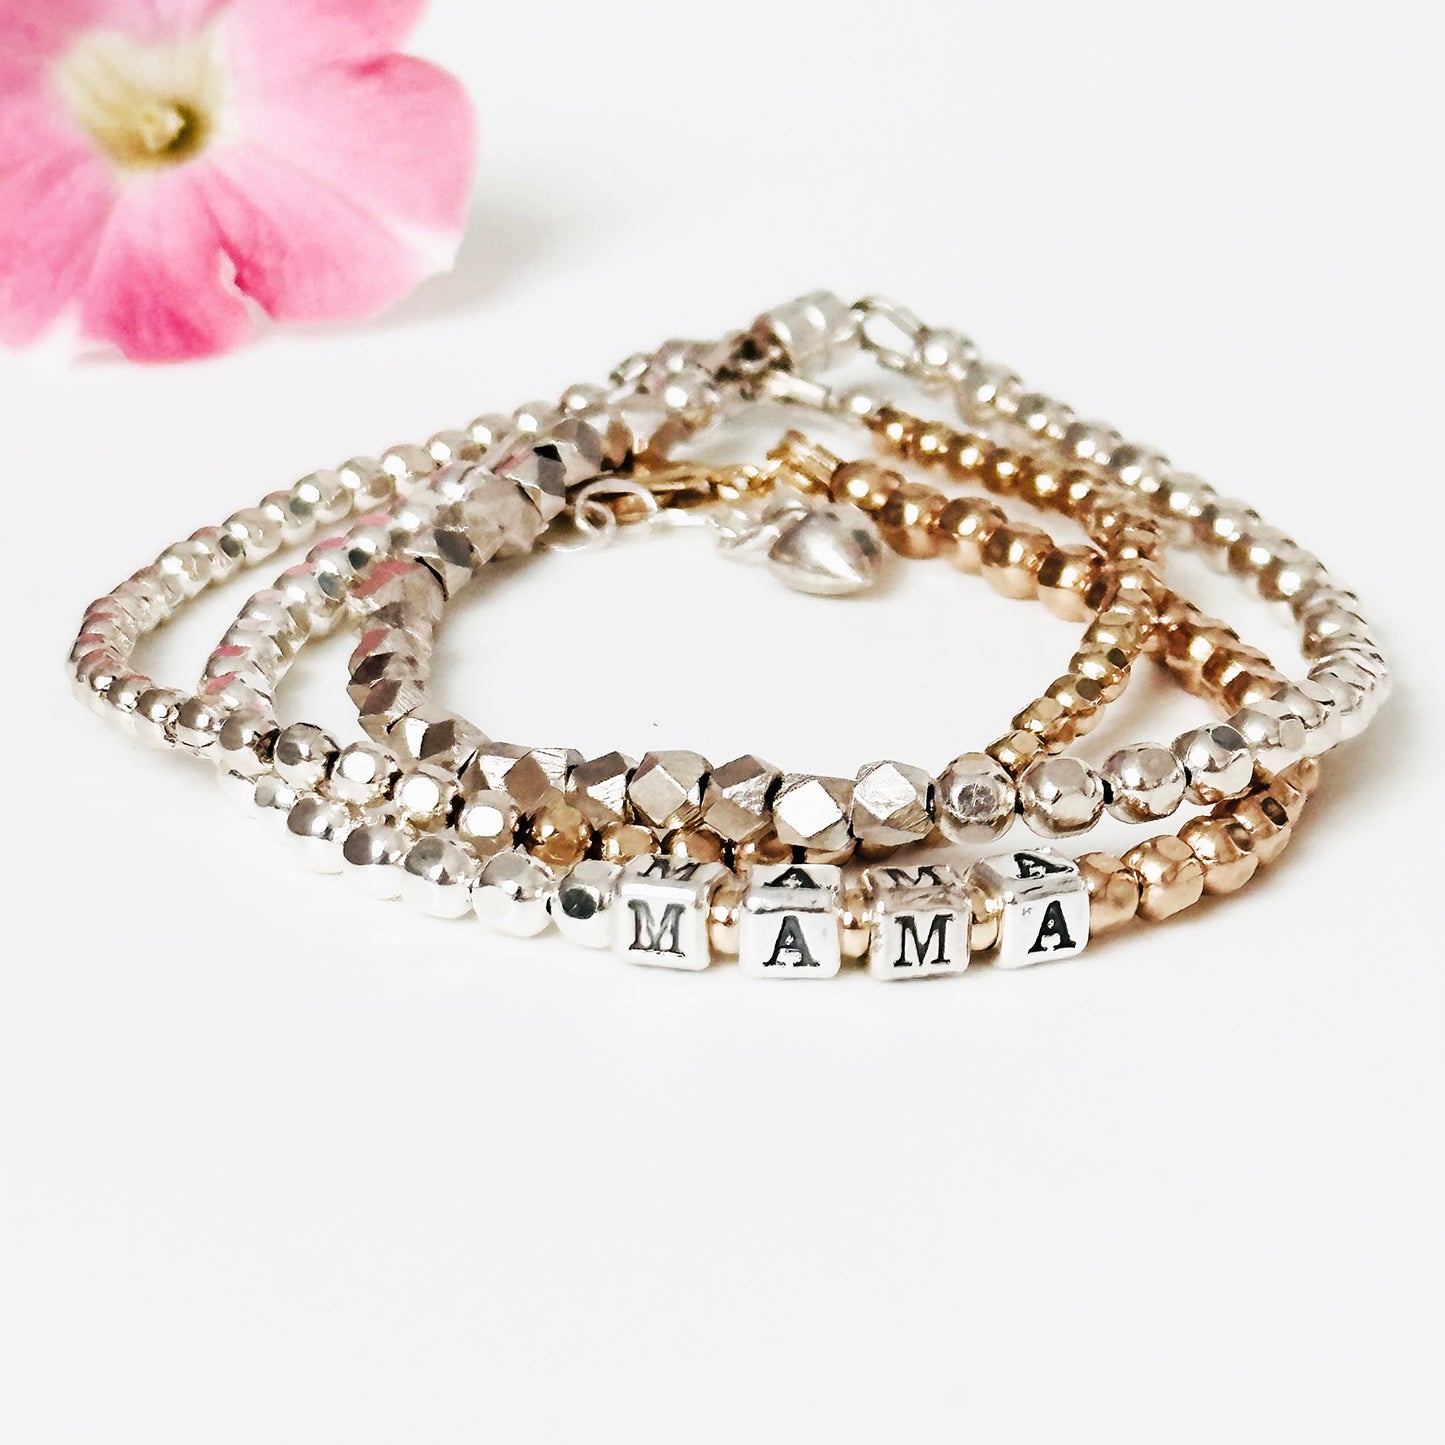 Mama Mother's Day word and heart bracelet in sterling silver and 14k mixed metals, shown with gold and silver stacking bracelets